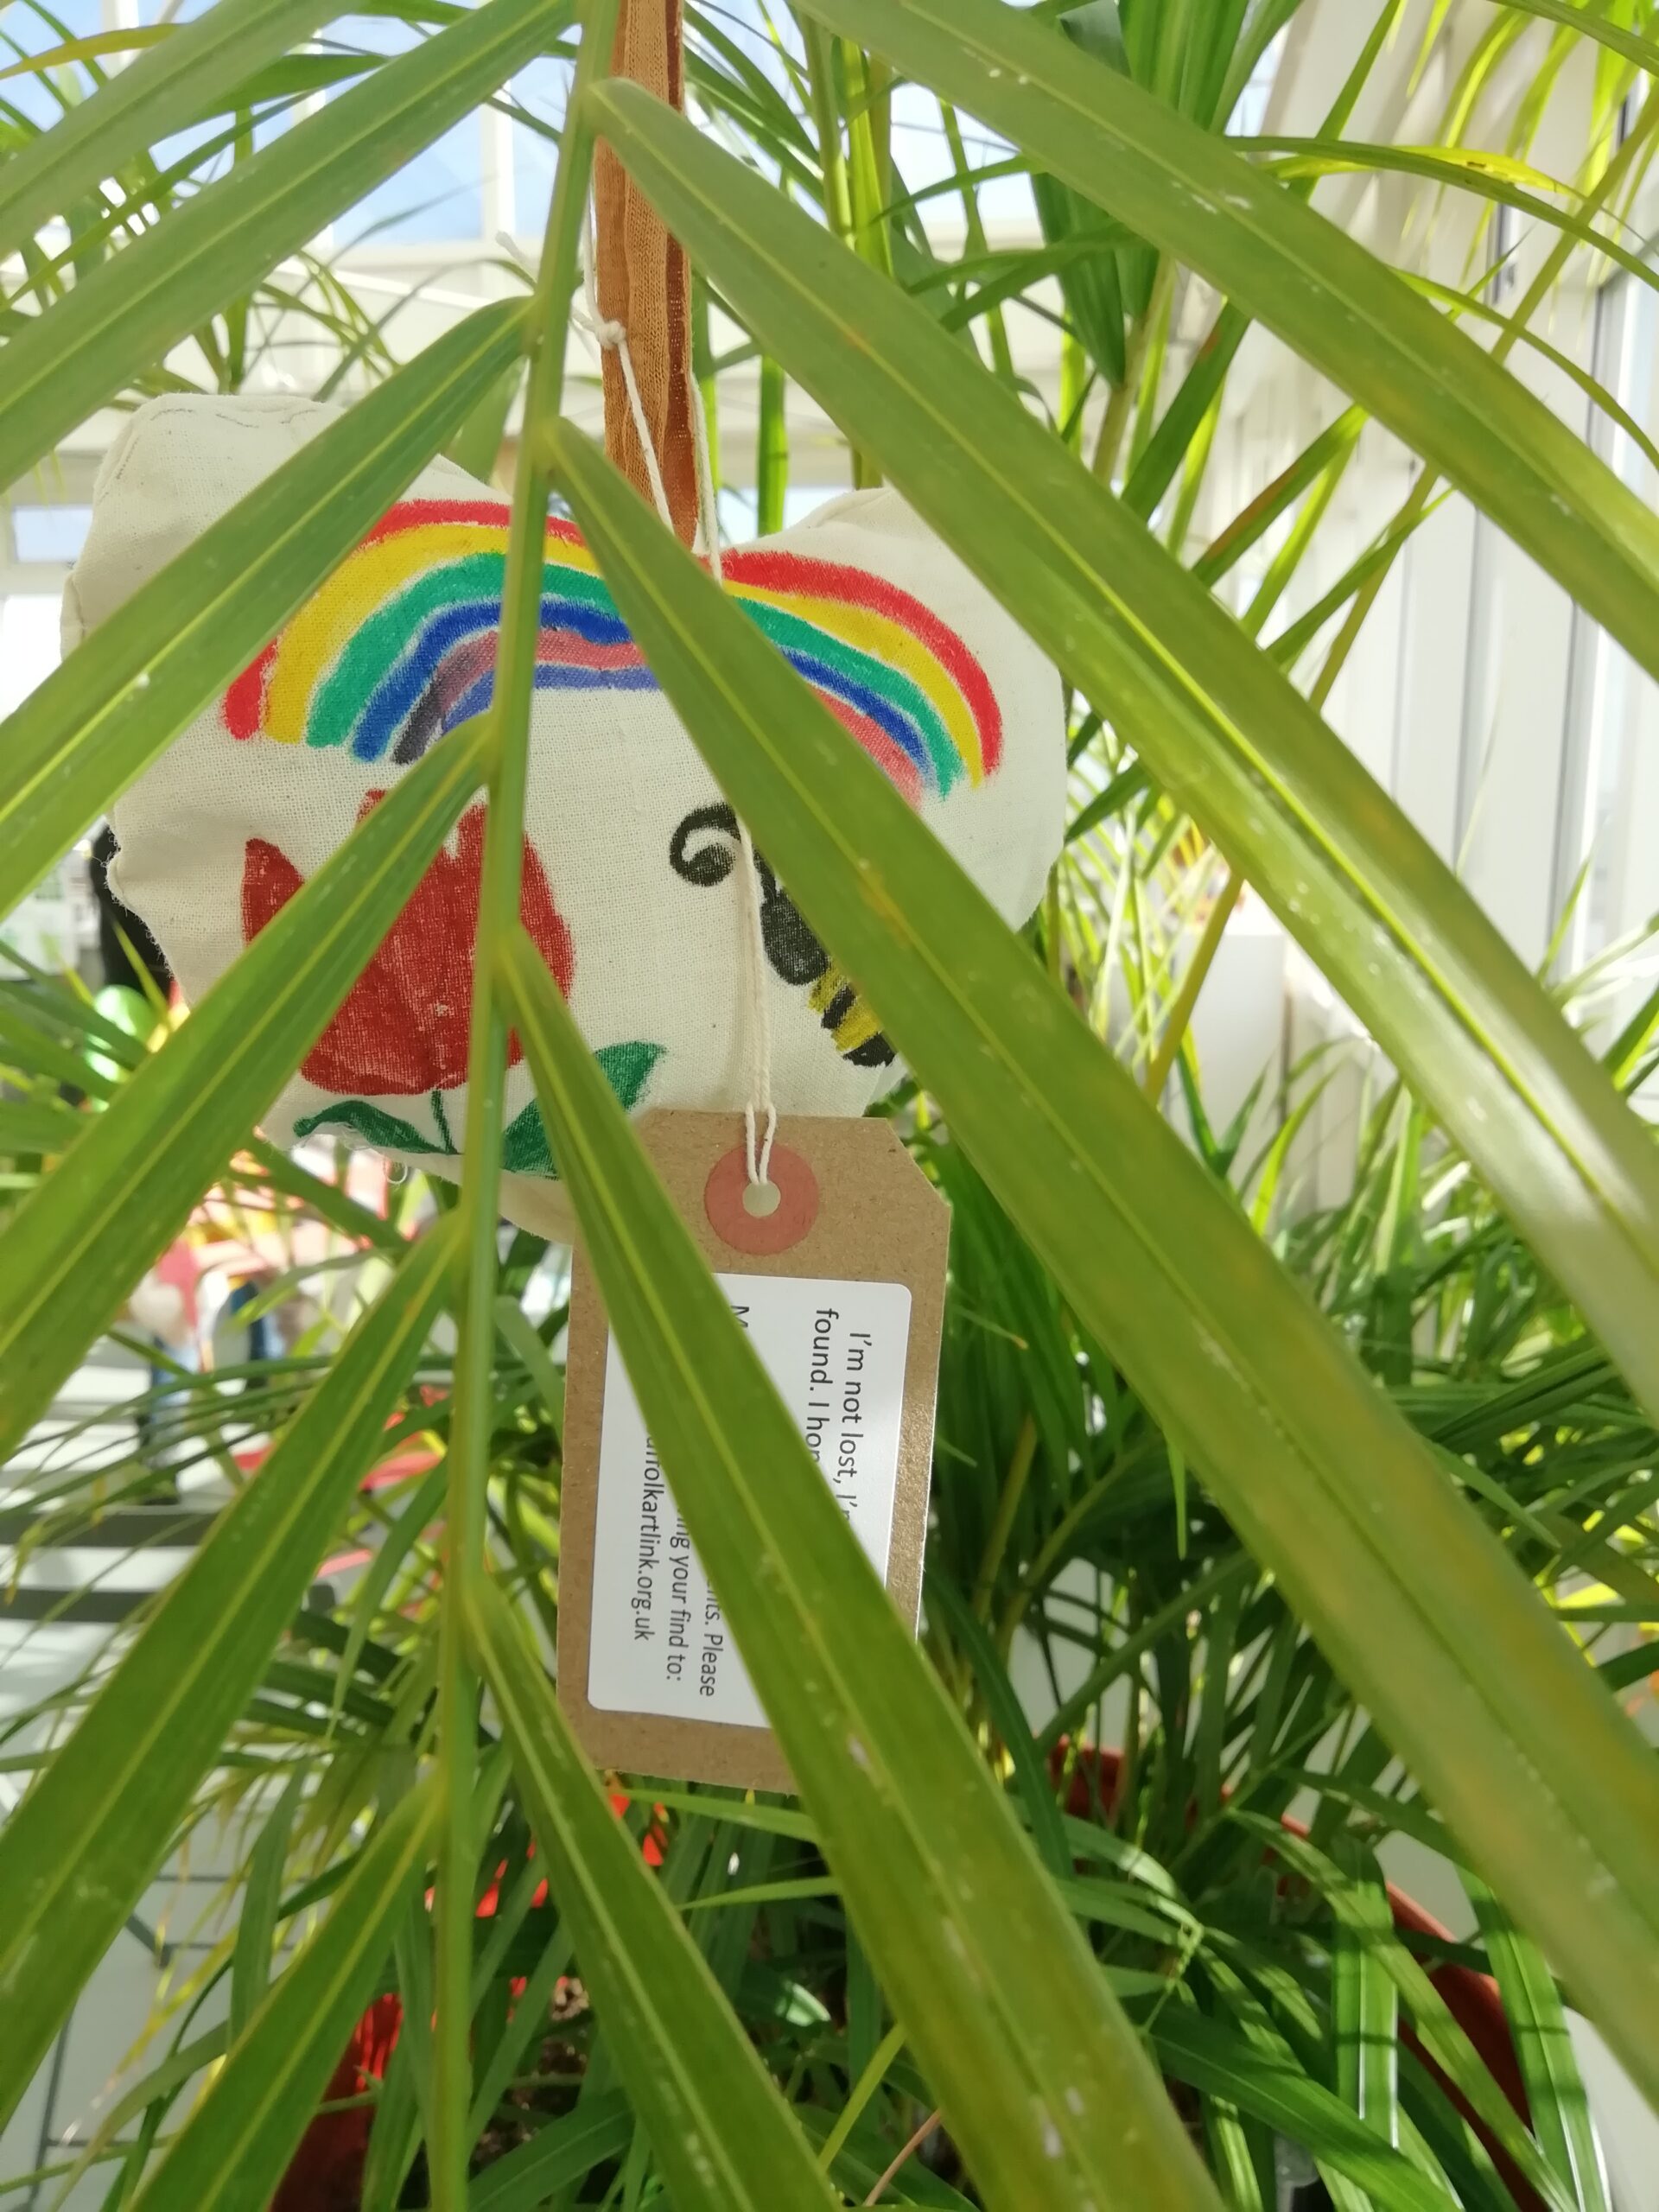 White heart decorated with a bee, a rainbow and a red rainbow hanging in a plant and partially obscured by foliage